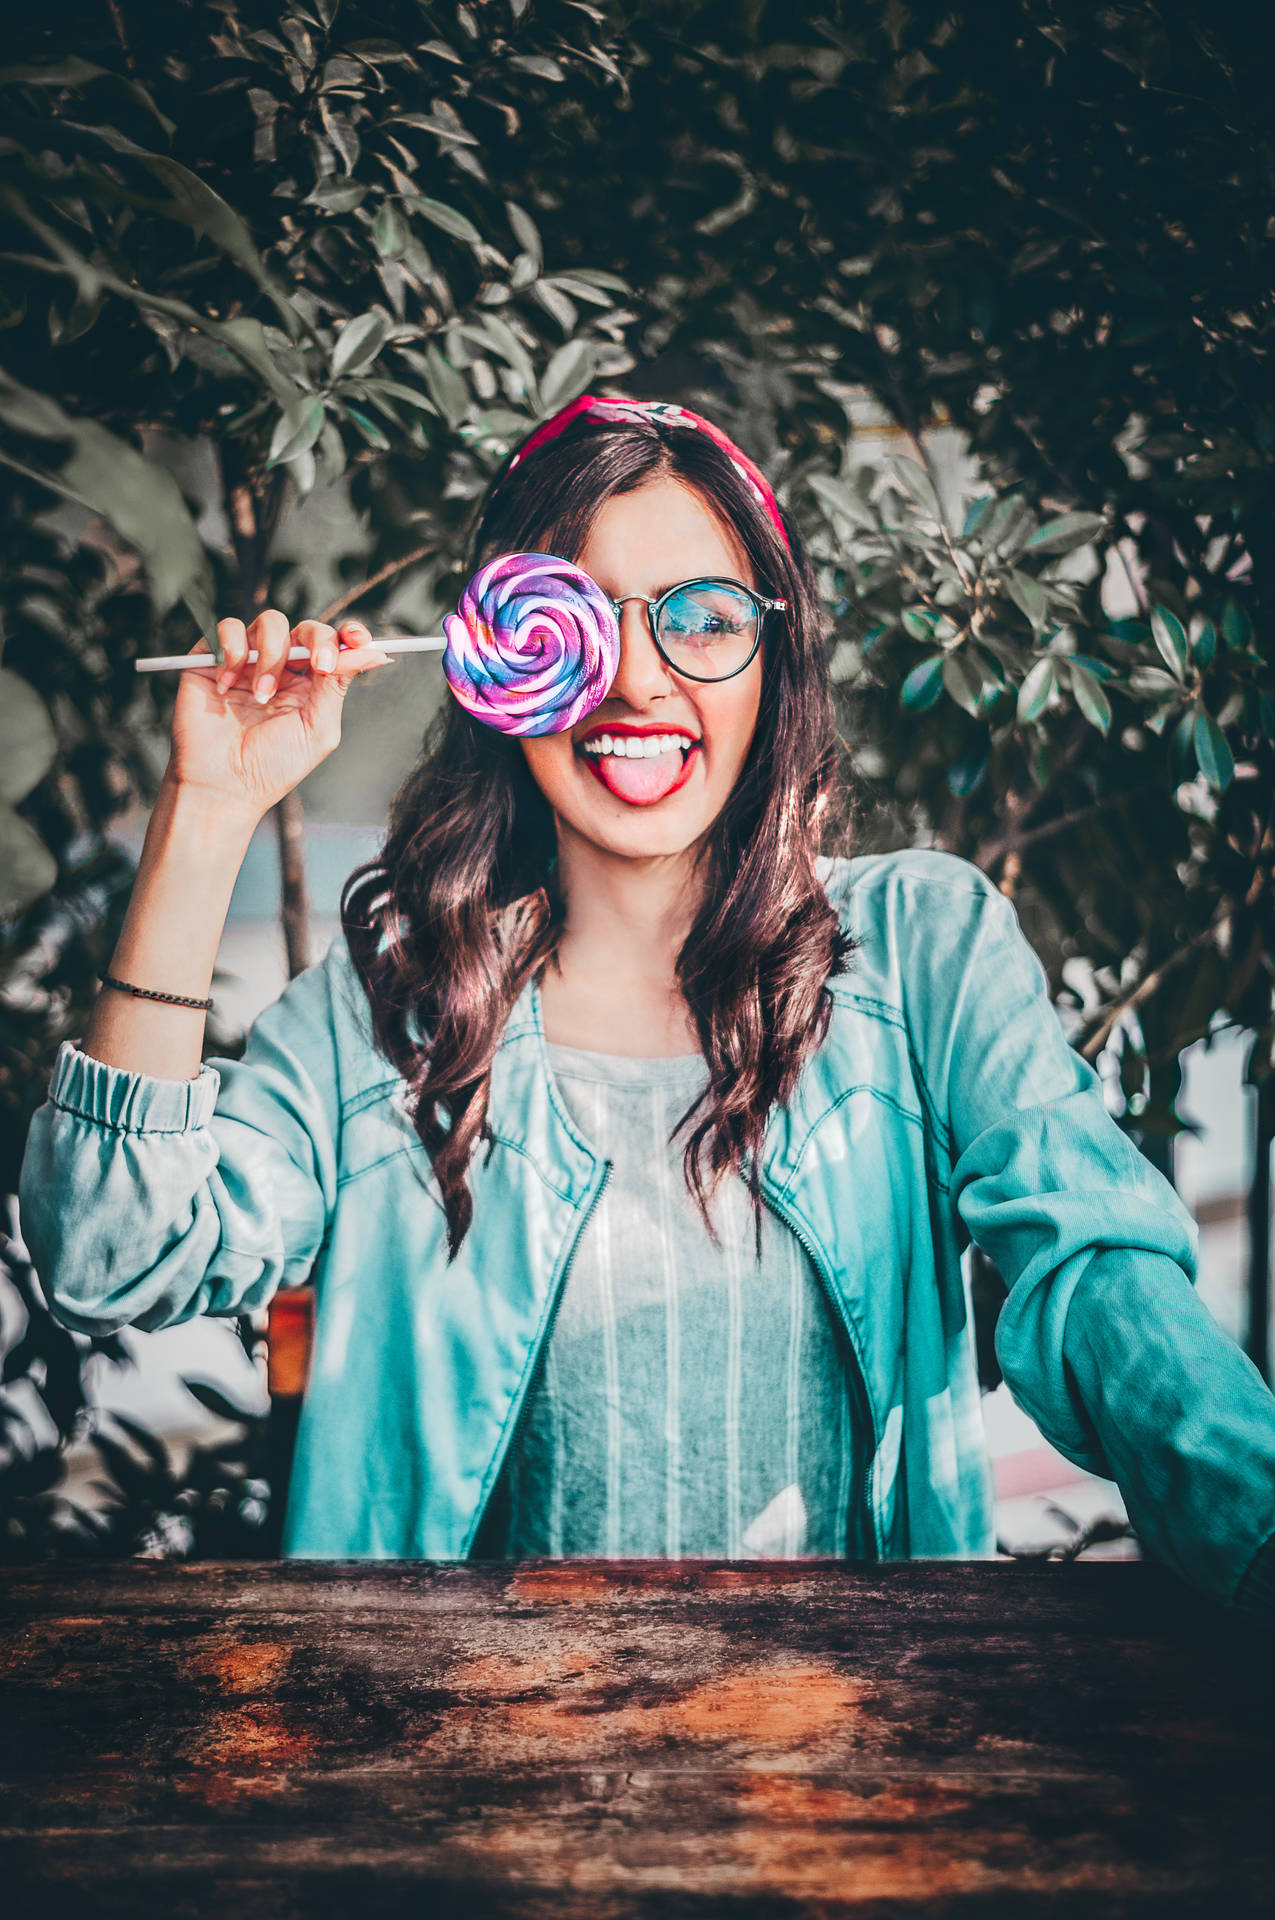 Cute Girl Wacky Pose With Lollipop Background